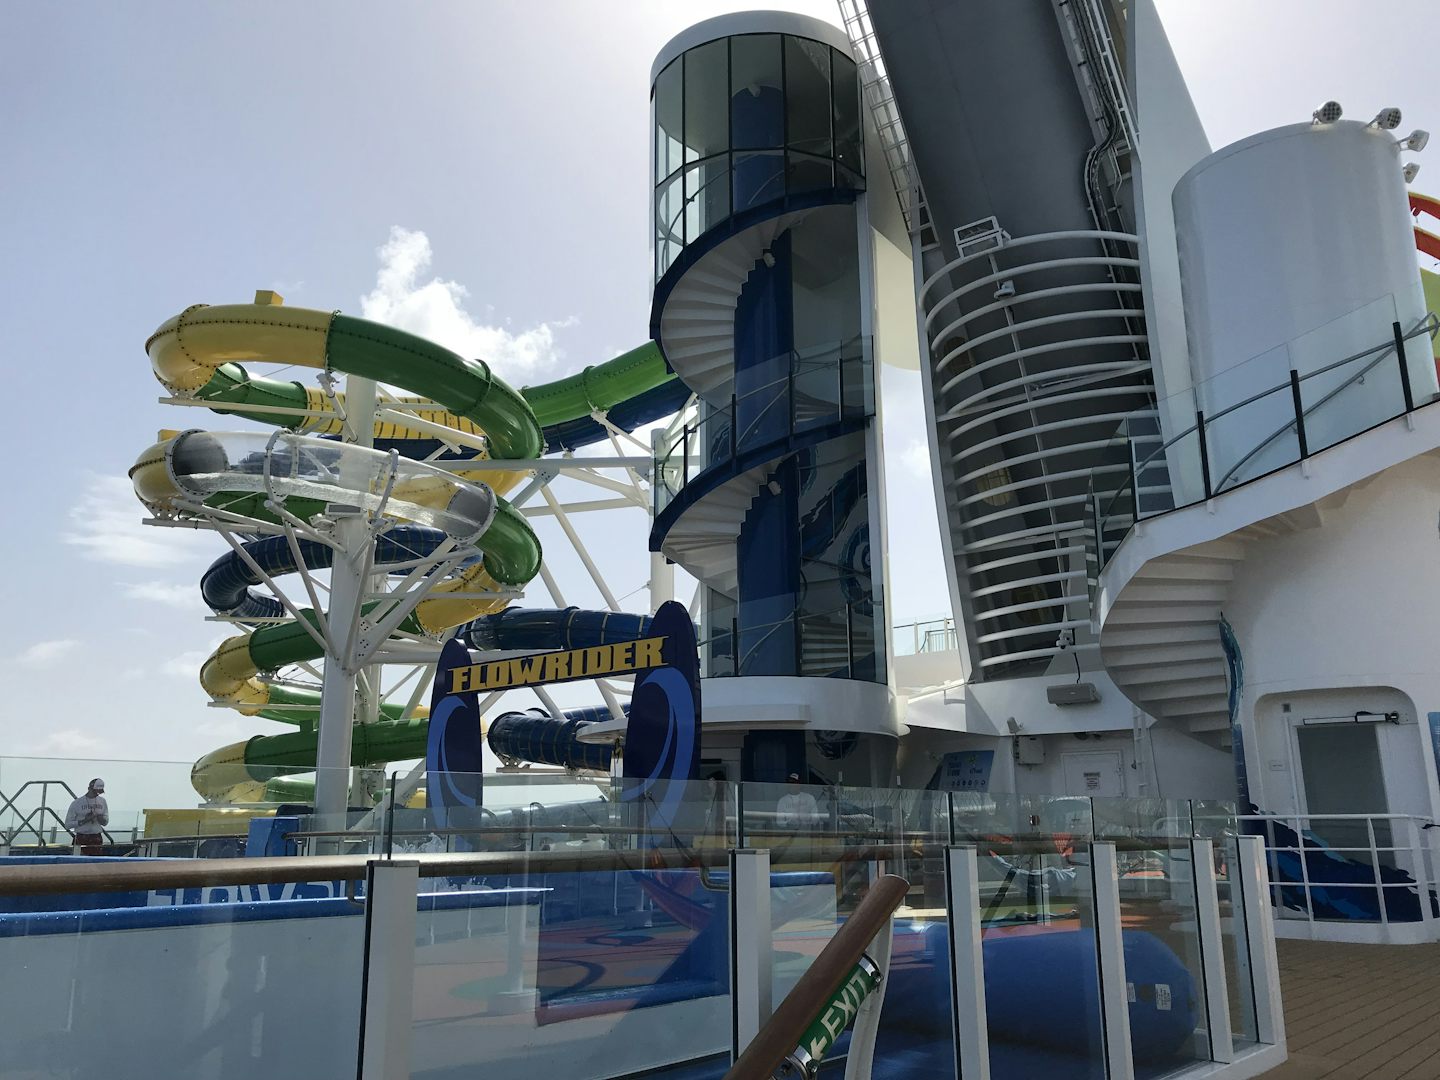 Perfect Storm is a great addition and very fast water slide.